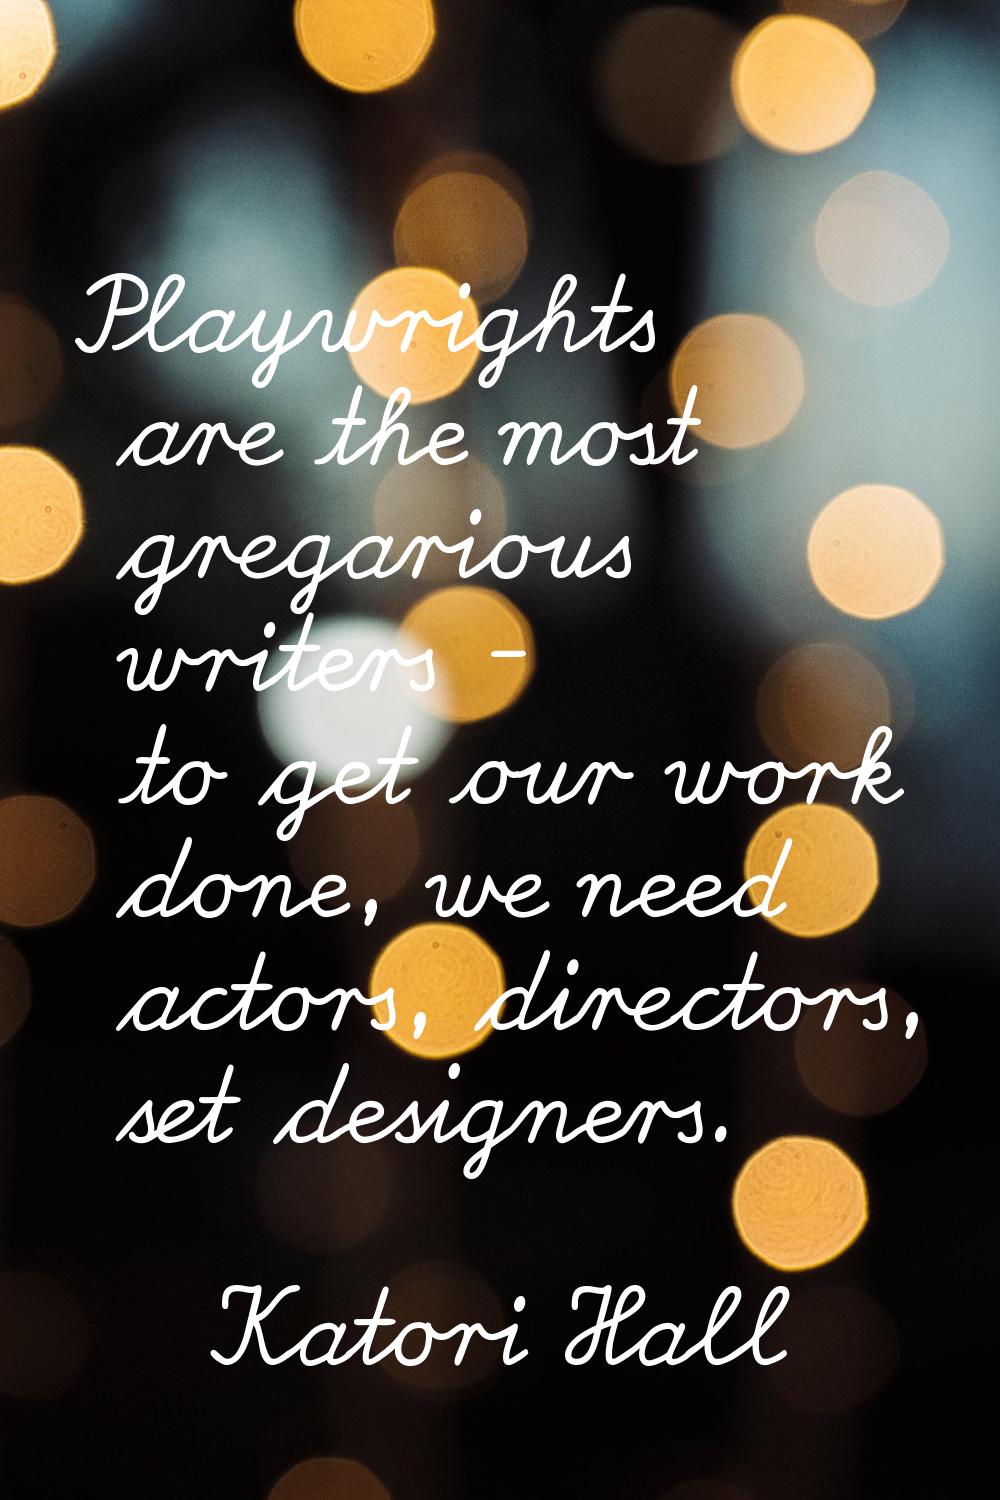 Playwrights are the most gregarious writers - to get our work done, we need actors, directors, set 